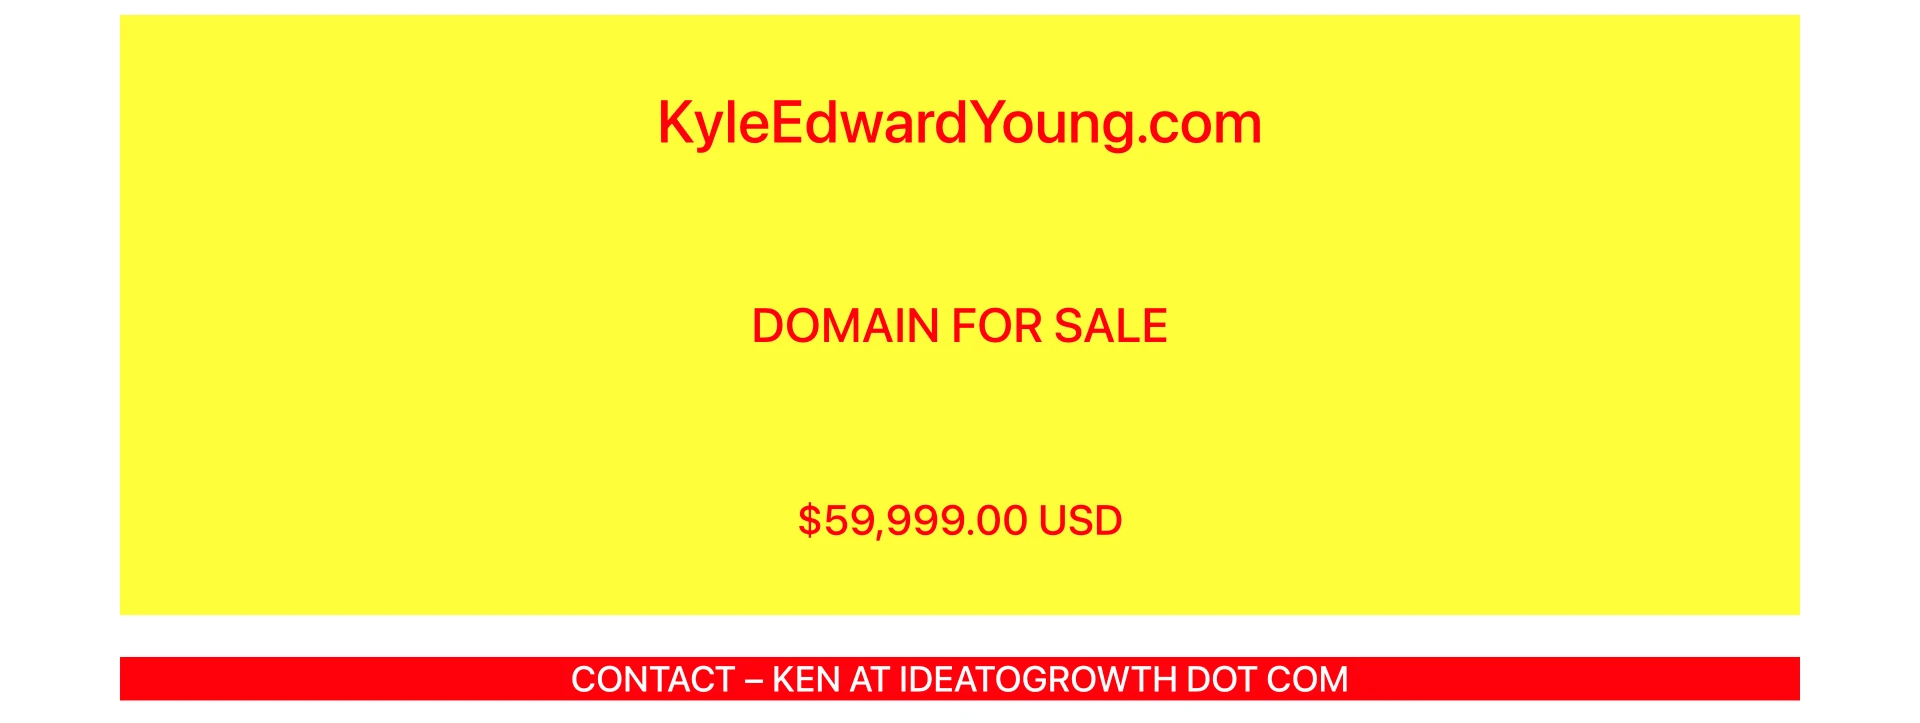 PARKED DOMAIN FOR SALE